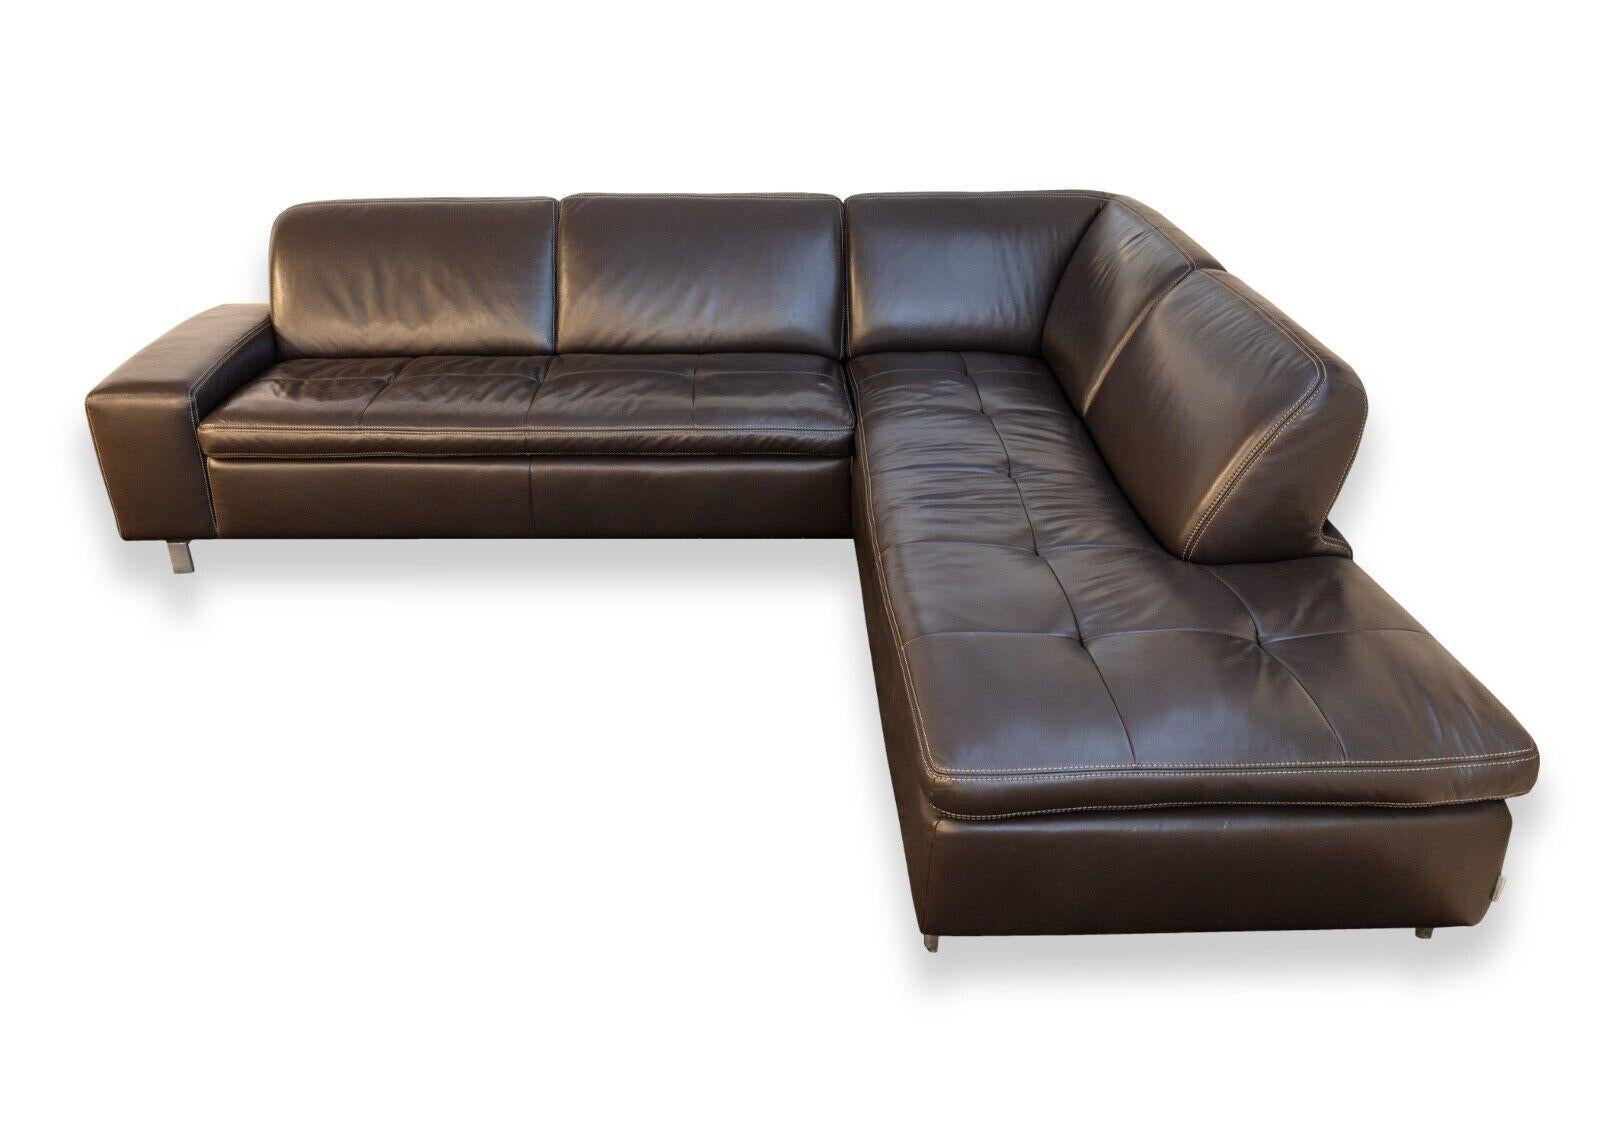 Contemporary Modern W Schillig Heidelberg Dark Brown Leather 2pc Sectional Sofa In Distressed Condition In Keego Harbor, MI